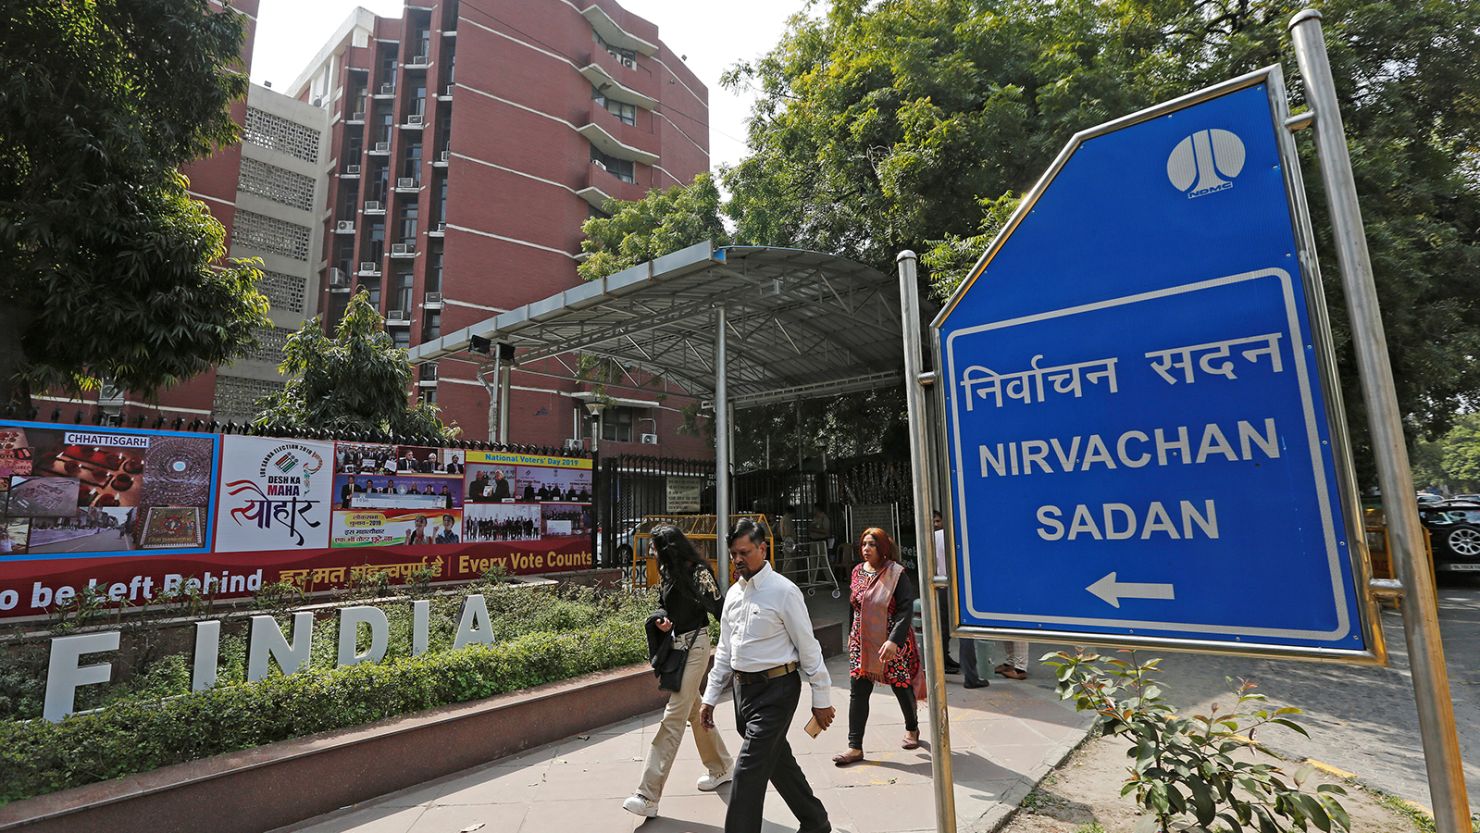 Pedestrians walk past the Election Commission of India offices in New Delhi on March 11, 2019.